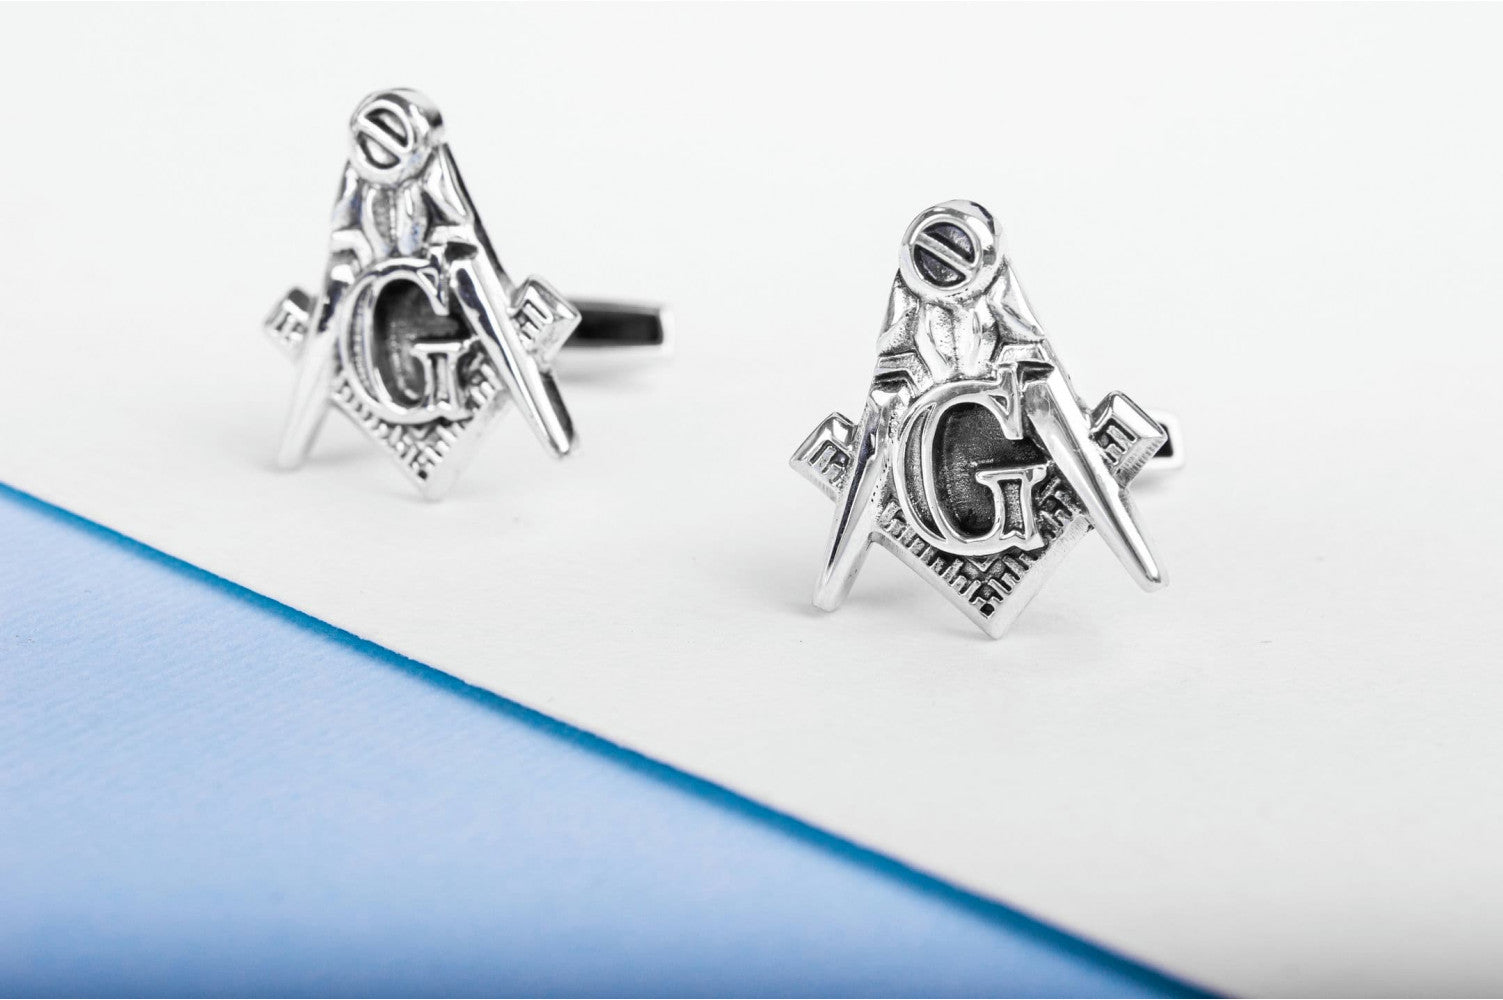 925 Silver Masonic Cufflinks with The Square and Compasses, Unique handmade jewelry